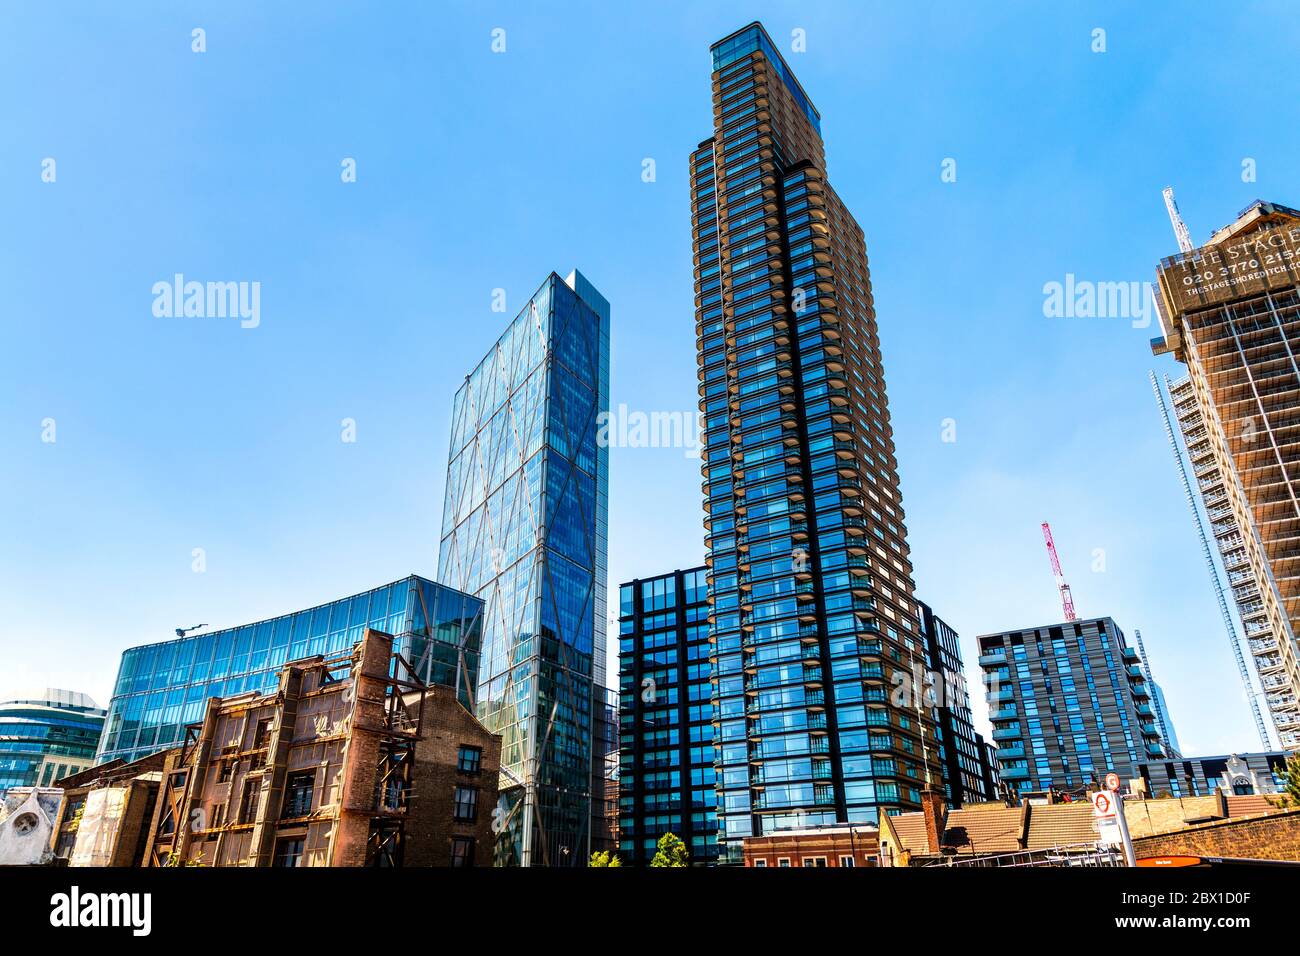 Liverpool Street and Shoreditch skyscrapers, Broadgate Tower and Principal Tower and decrepit buildings in redevelopment area around Commercial St, UK Stock Photo